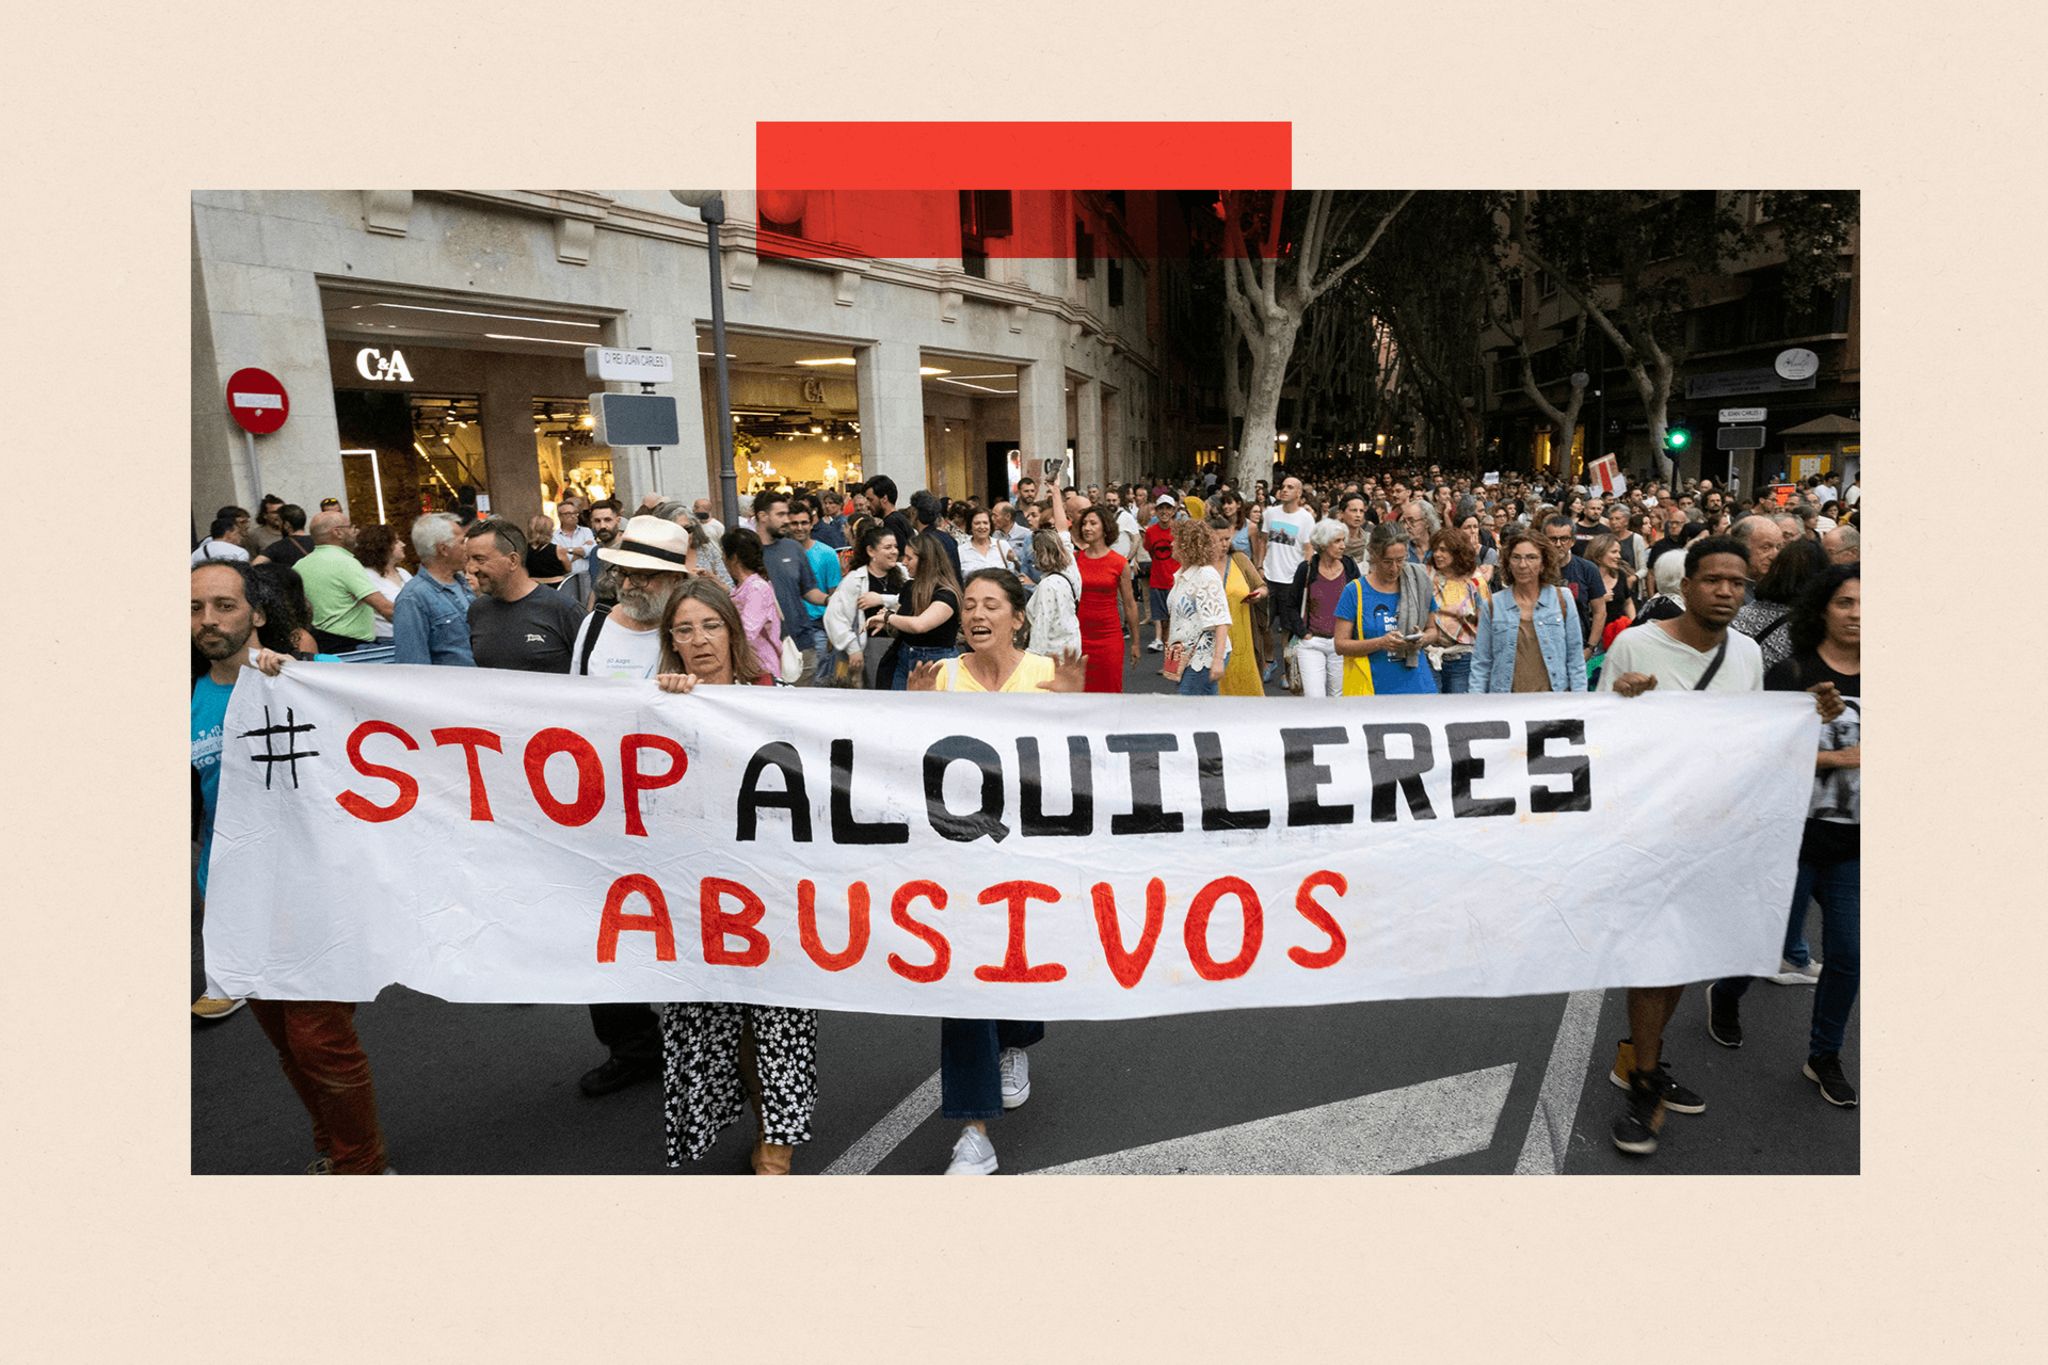 Protesters in Majorca carrying a banner that says "stop alquileres abusivos" which translates as "stop abusive rentals"